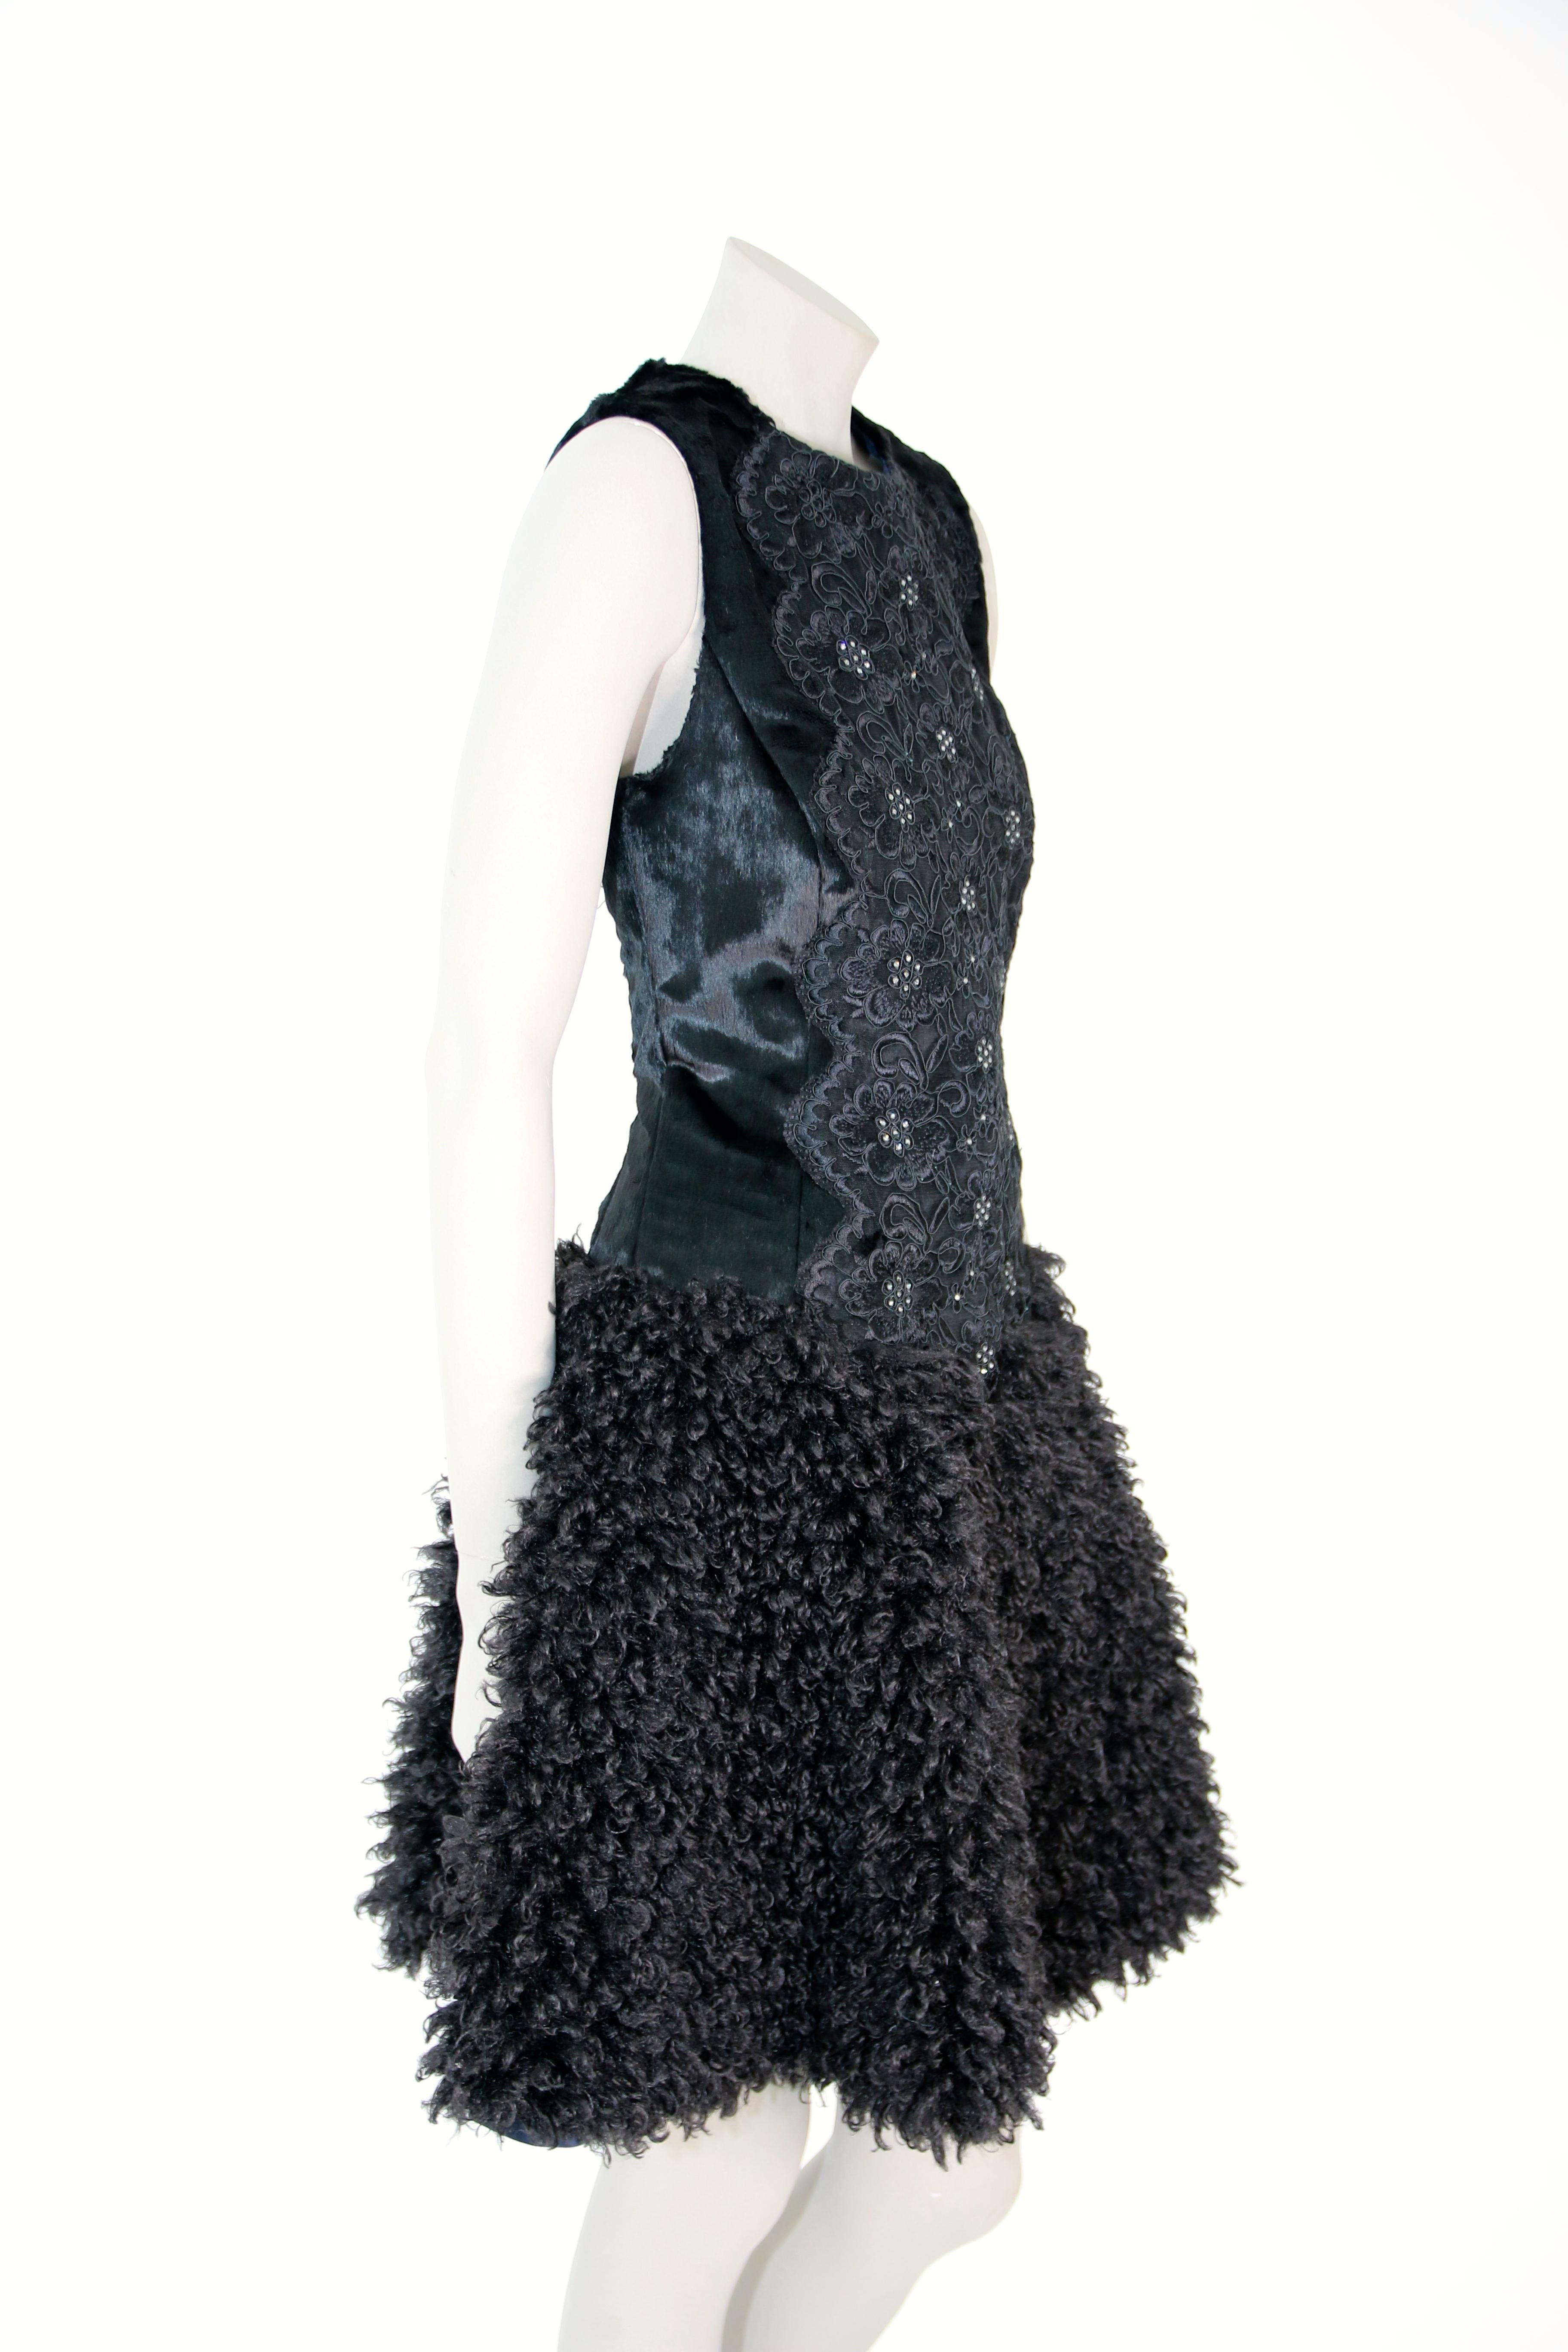 The Mia Pelush black faux fur dress with guipure lace and Swarovski crystals is a one of a kind exclusive piece. Featuring the highest quality man made pelage, this original fur free dress is a fun replica of a boucle' curly lamb fur, combined with